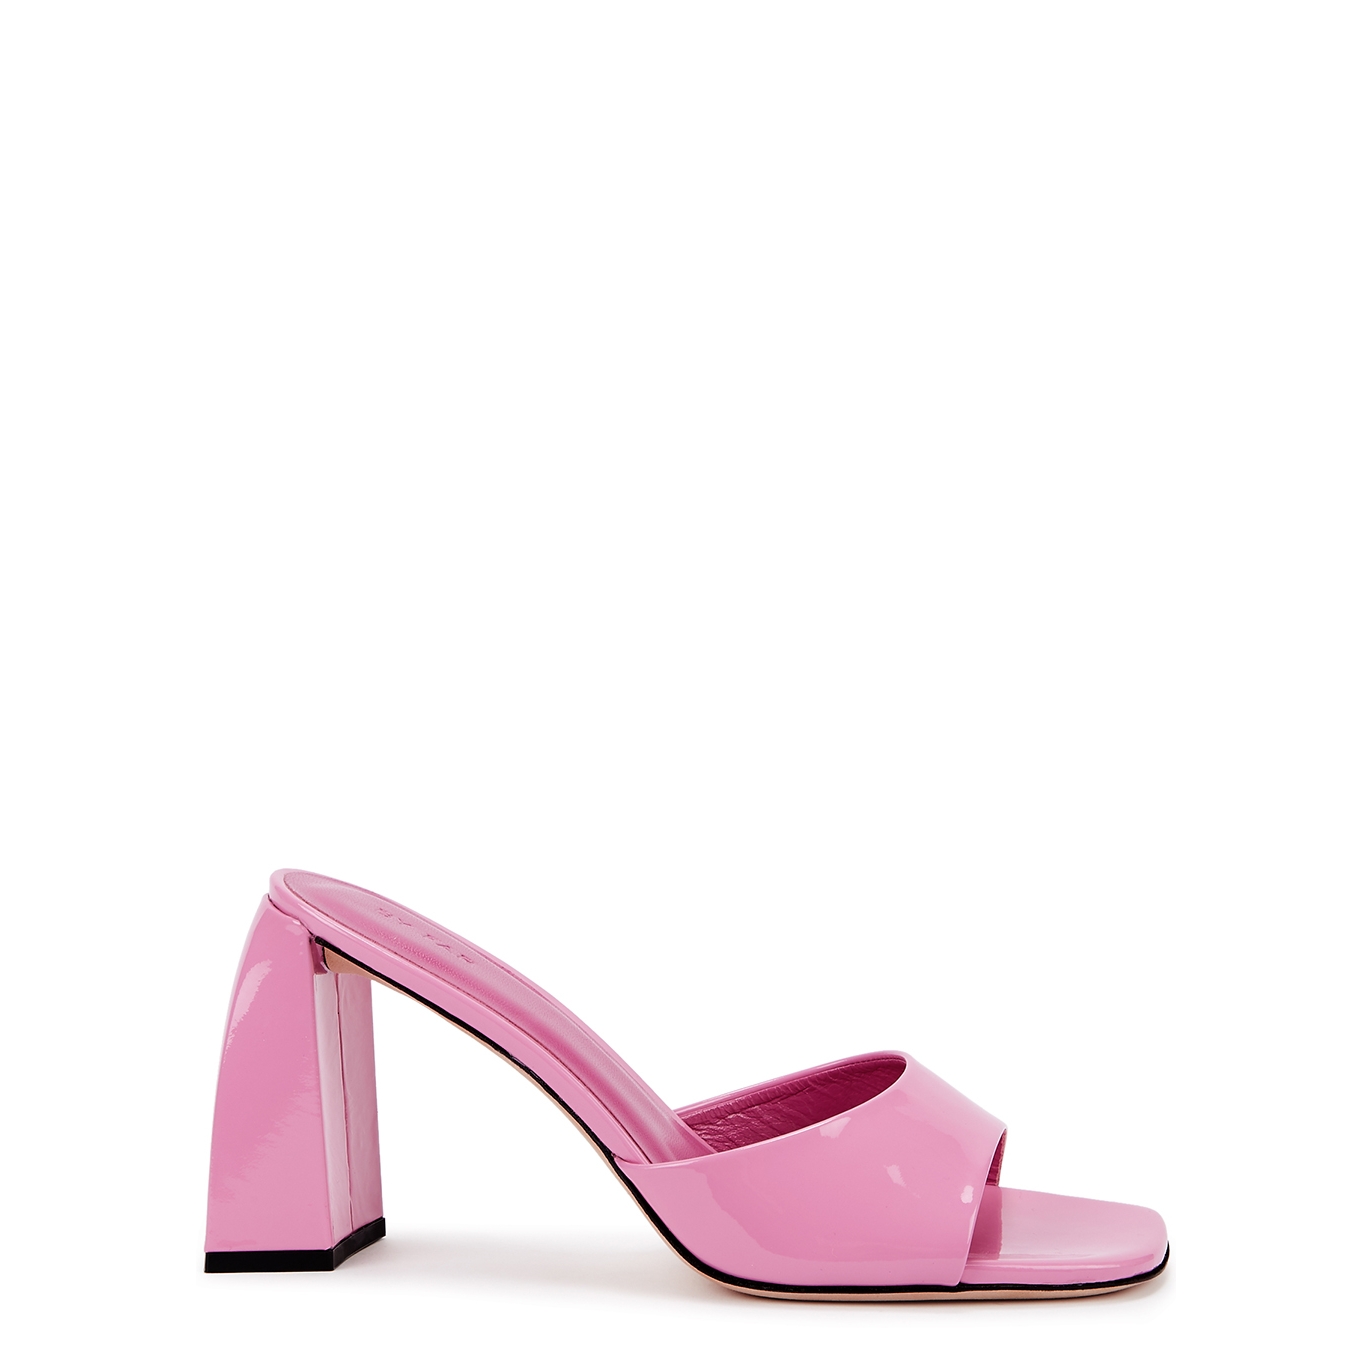 BY FAR Michele 100 Pink Patent Leather Mules - 6